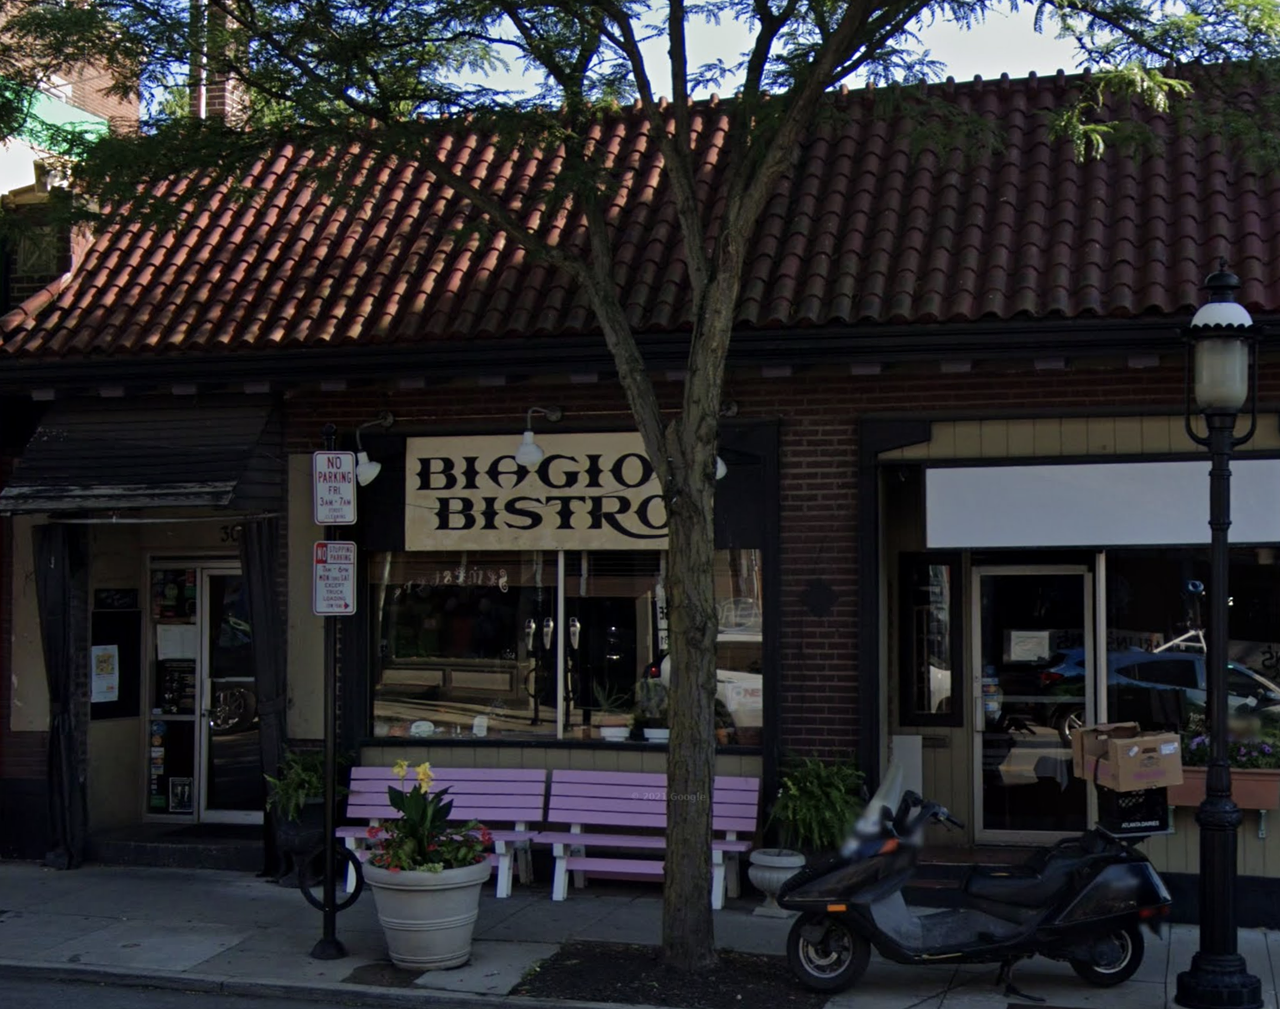 8. Biagio's Bistro
308 Ludlow Ave., Clifton
"Amazing, authentic food and attentive wait staff! Didn't get to try anything from the pastry case but will be returning soon!" — Holly E.